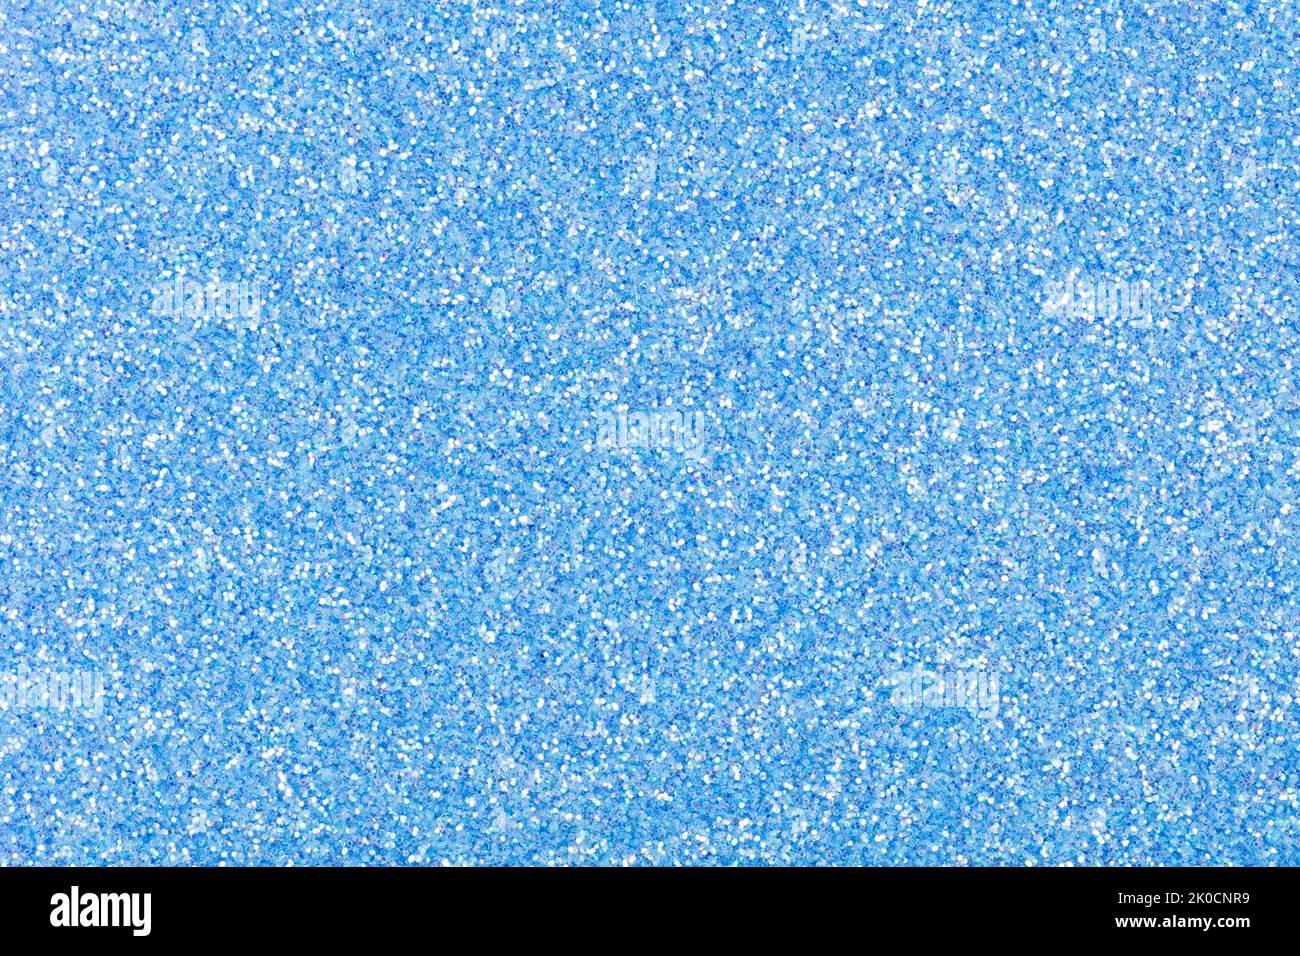 Glitter texture in gentle blue tone for Christmas individual creative design work. Sparkling shiny wrapping paper for New Year holiday seasonal Stock Photo